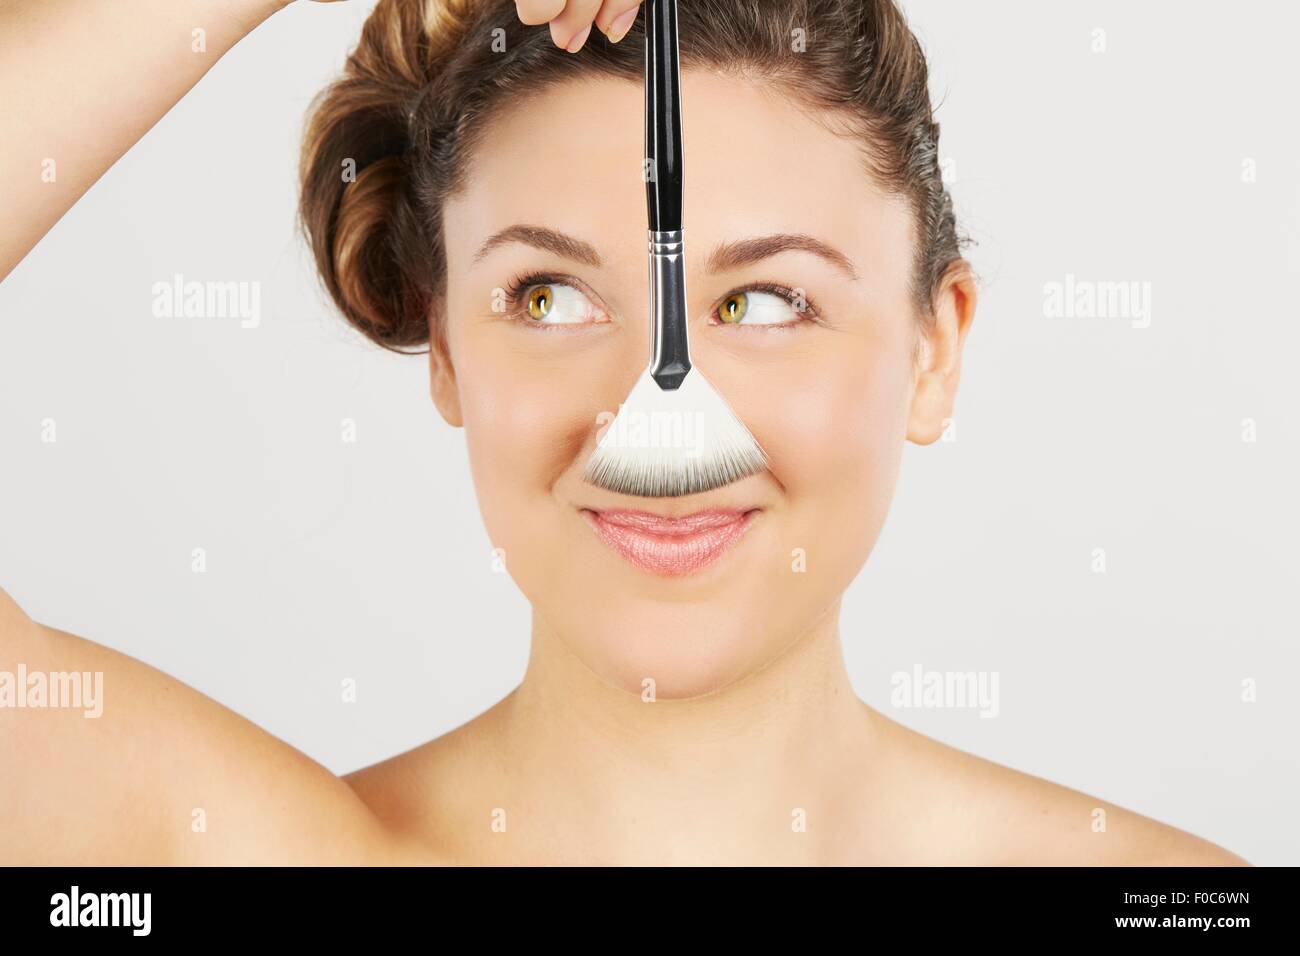 Young woman holding make-up brush Stock Photo